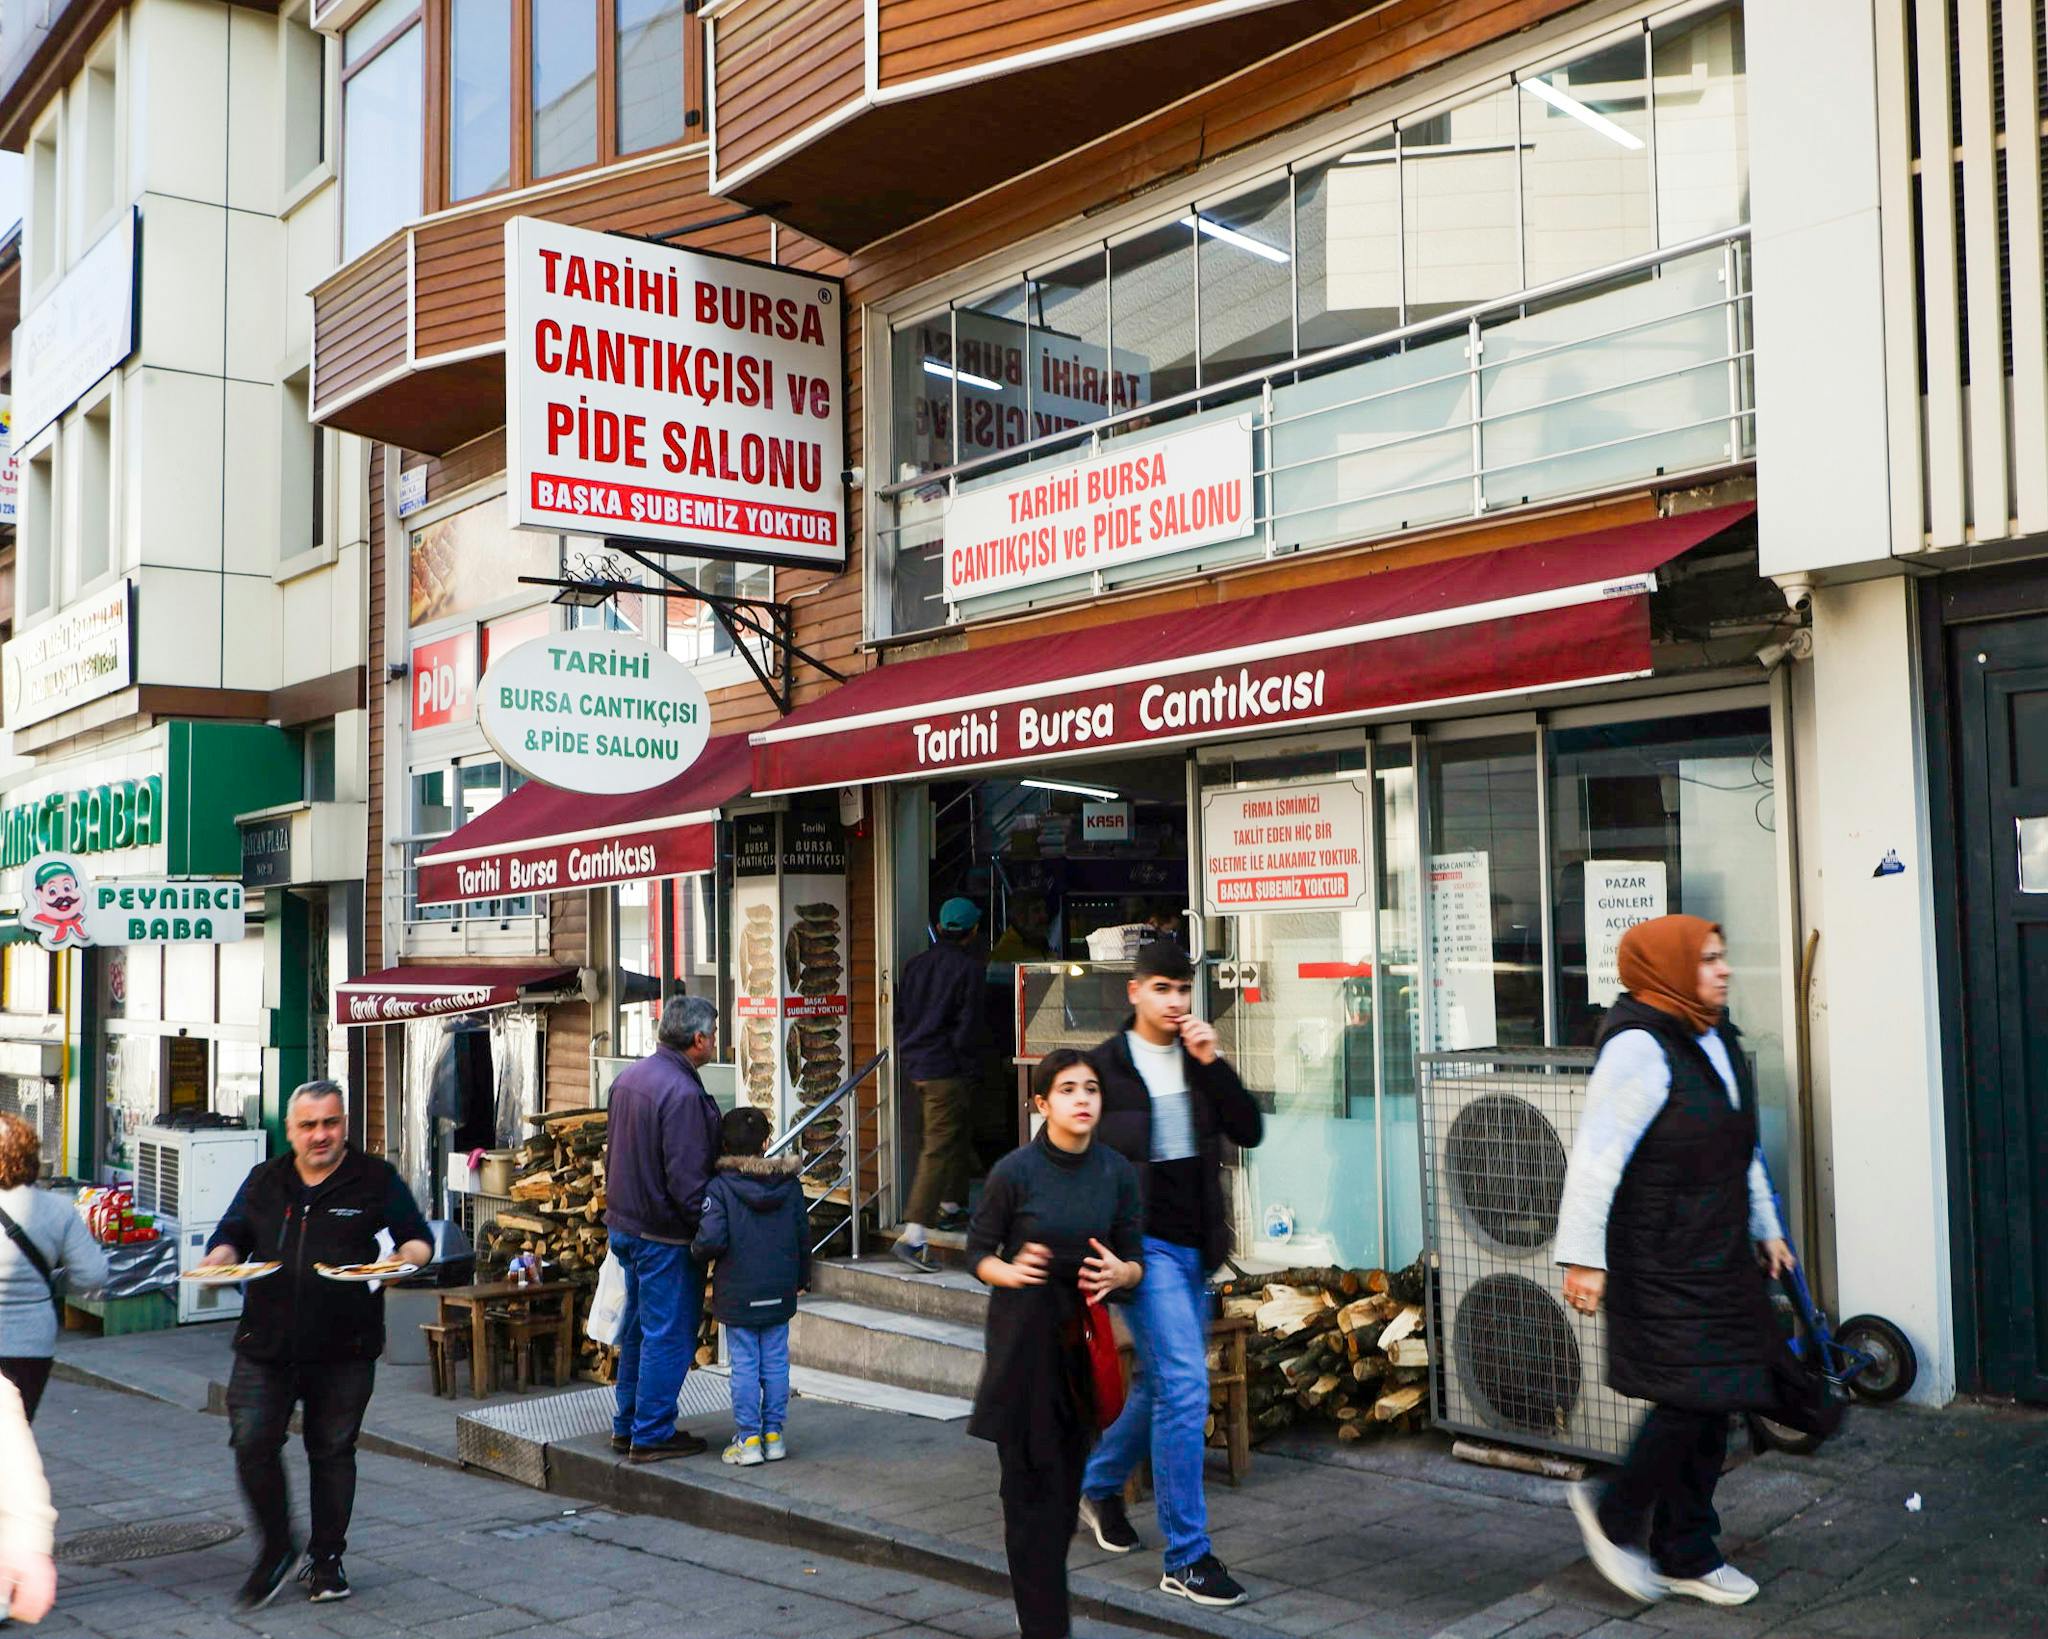 The 30-year-old Cantık & Pide restaurant with No other branches tagline.